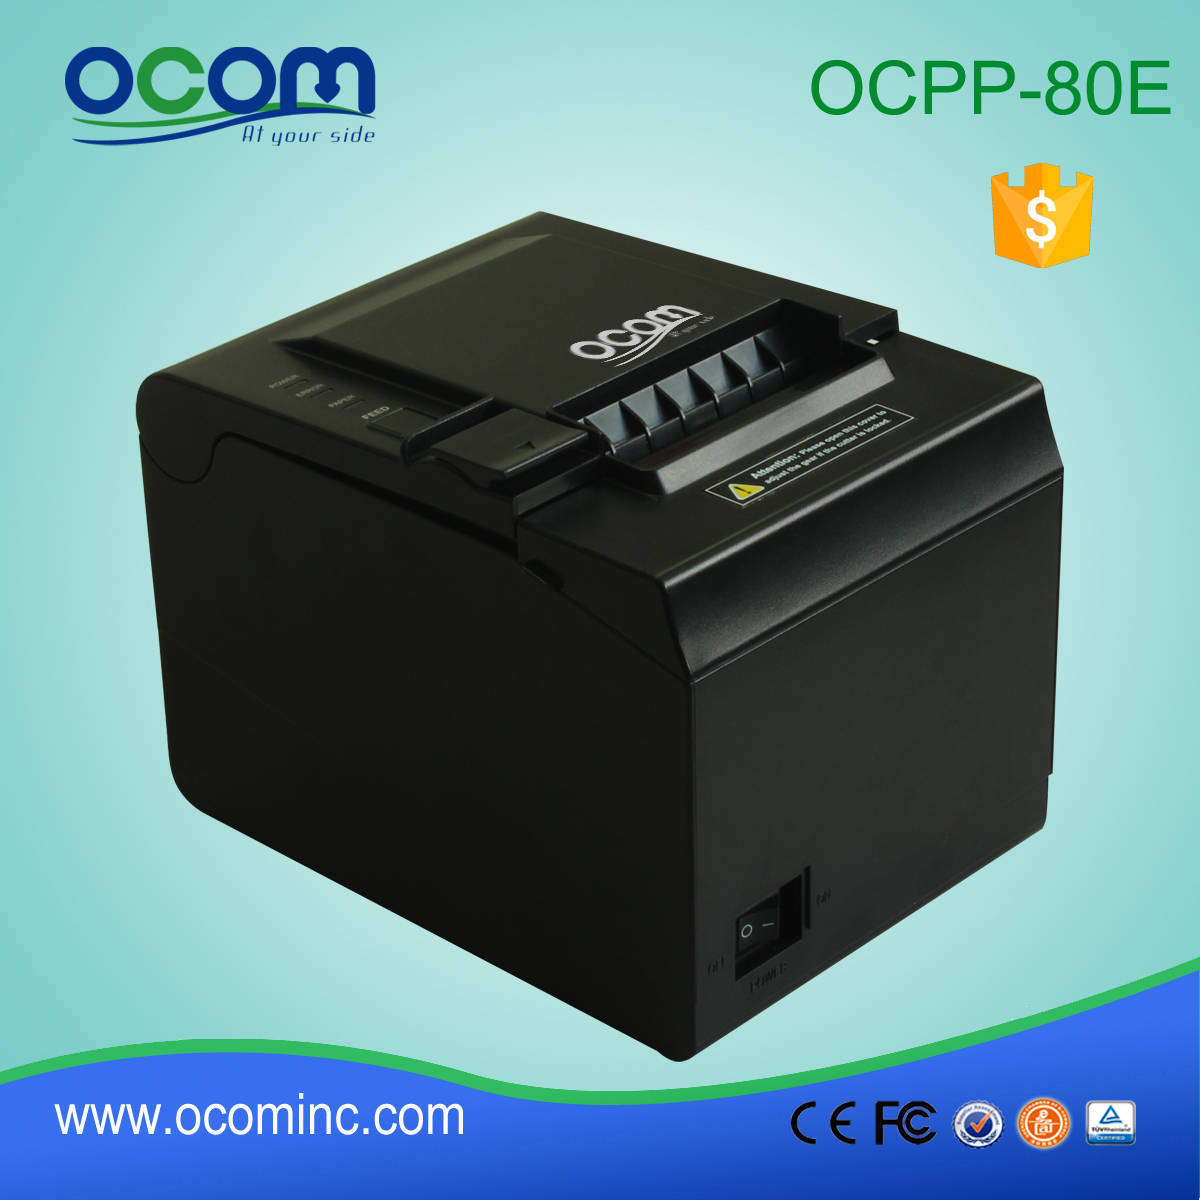 OCPP-80E-US 80mm Thermal Printer With Auto Cutter USB+RS232 Ports